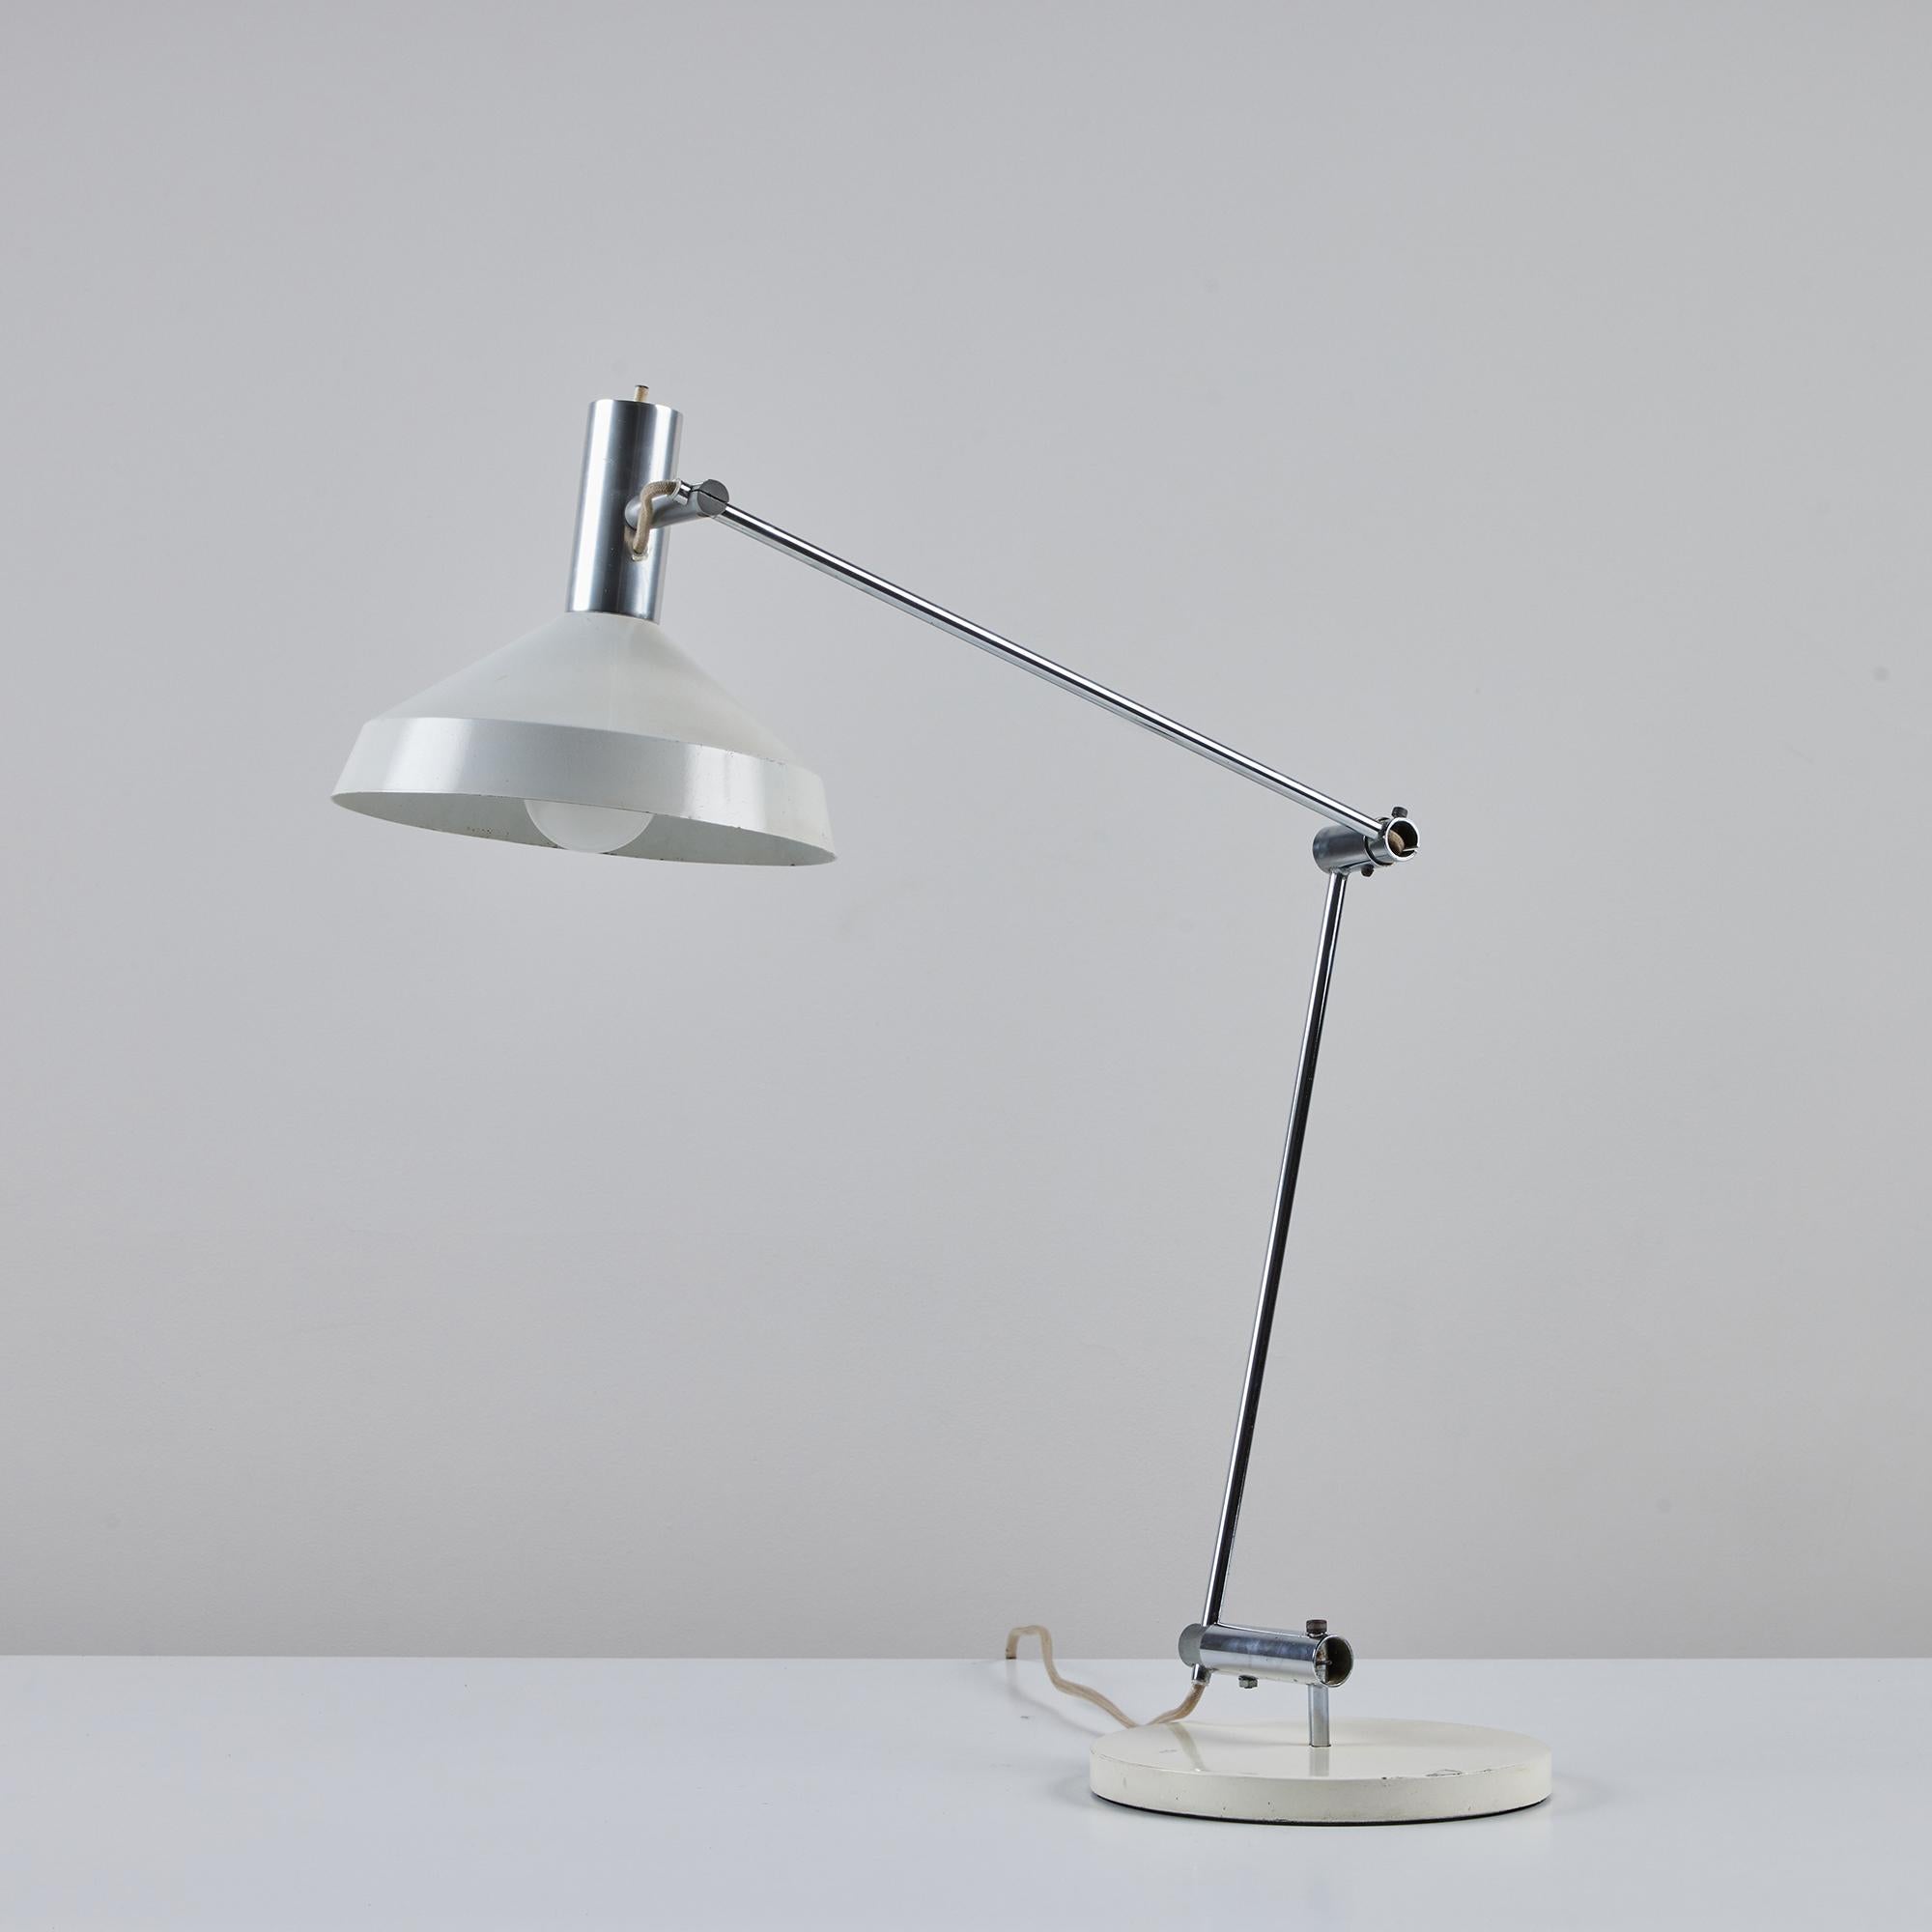 Enameled Rosemarie & Rico Baltensweiler Articulating Table Lamp For Sale